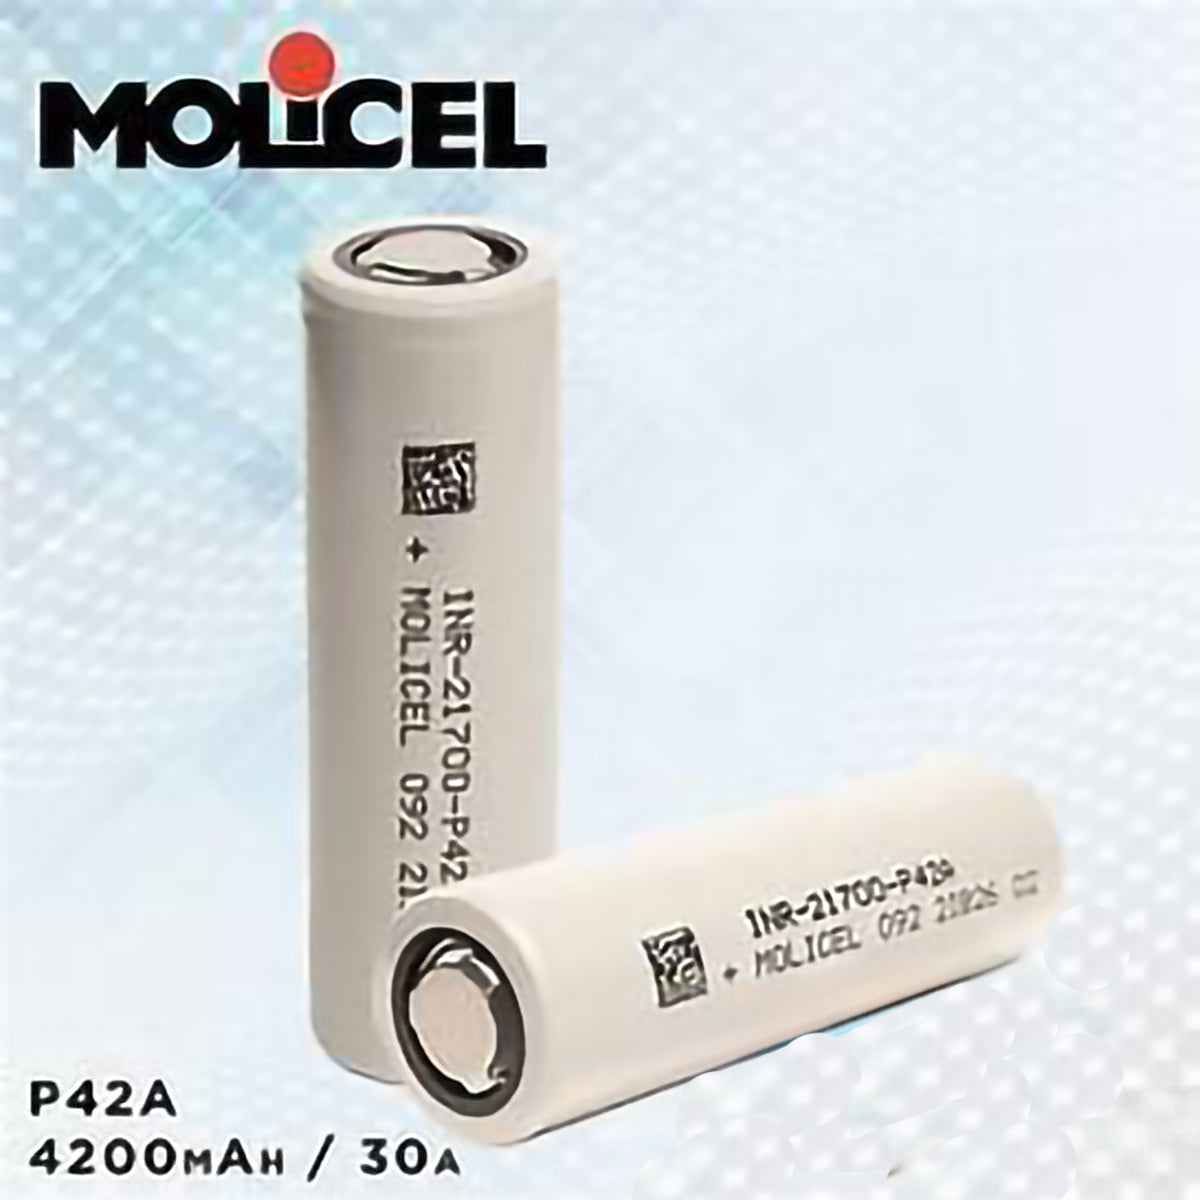 52V 21Ah Lithium Ion E-bike Battery with Molicel P42A Cells